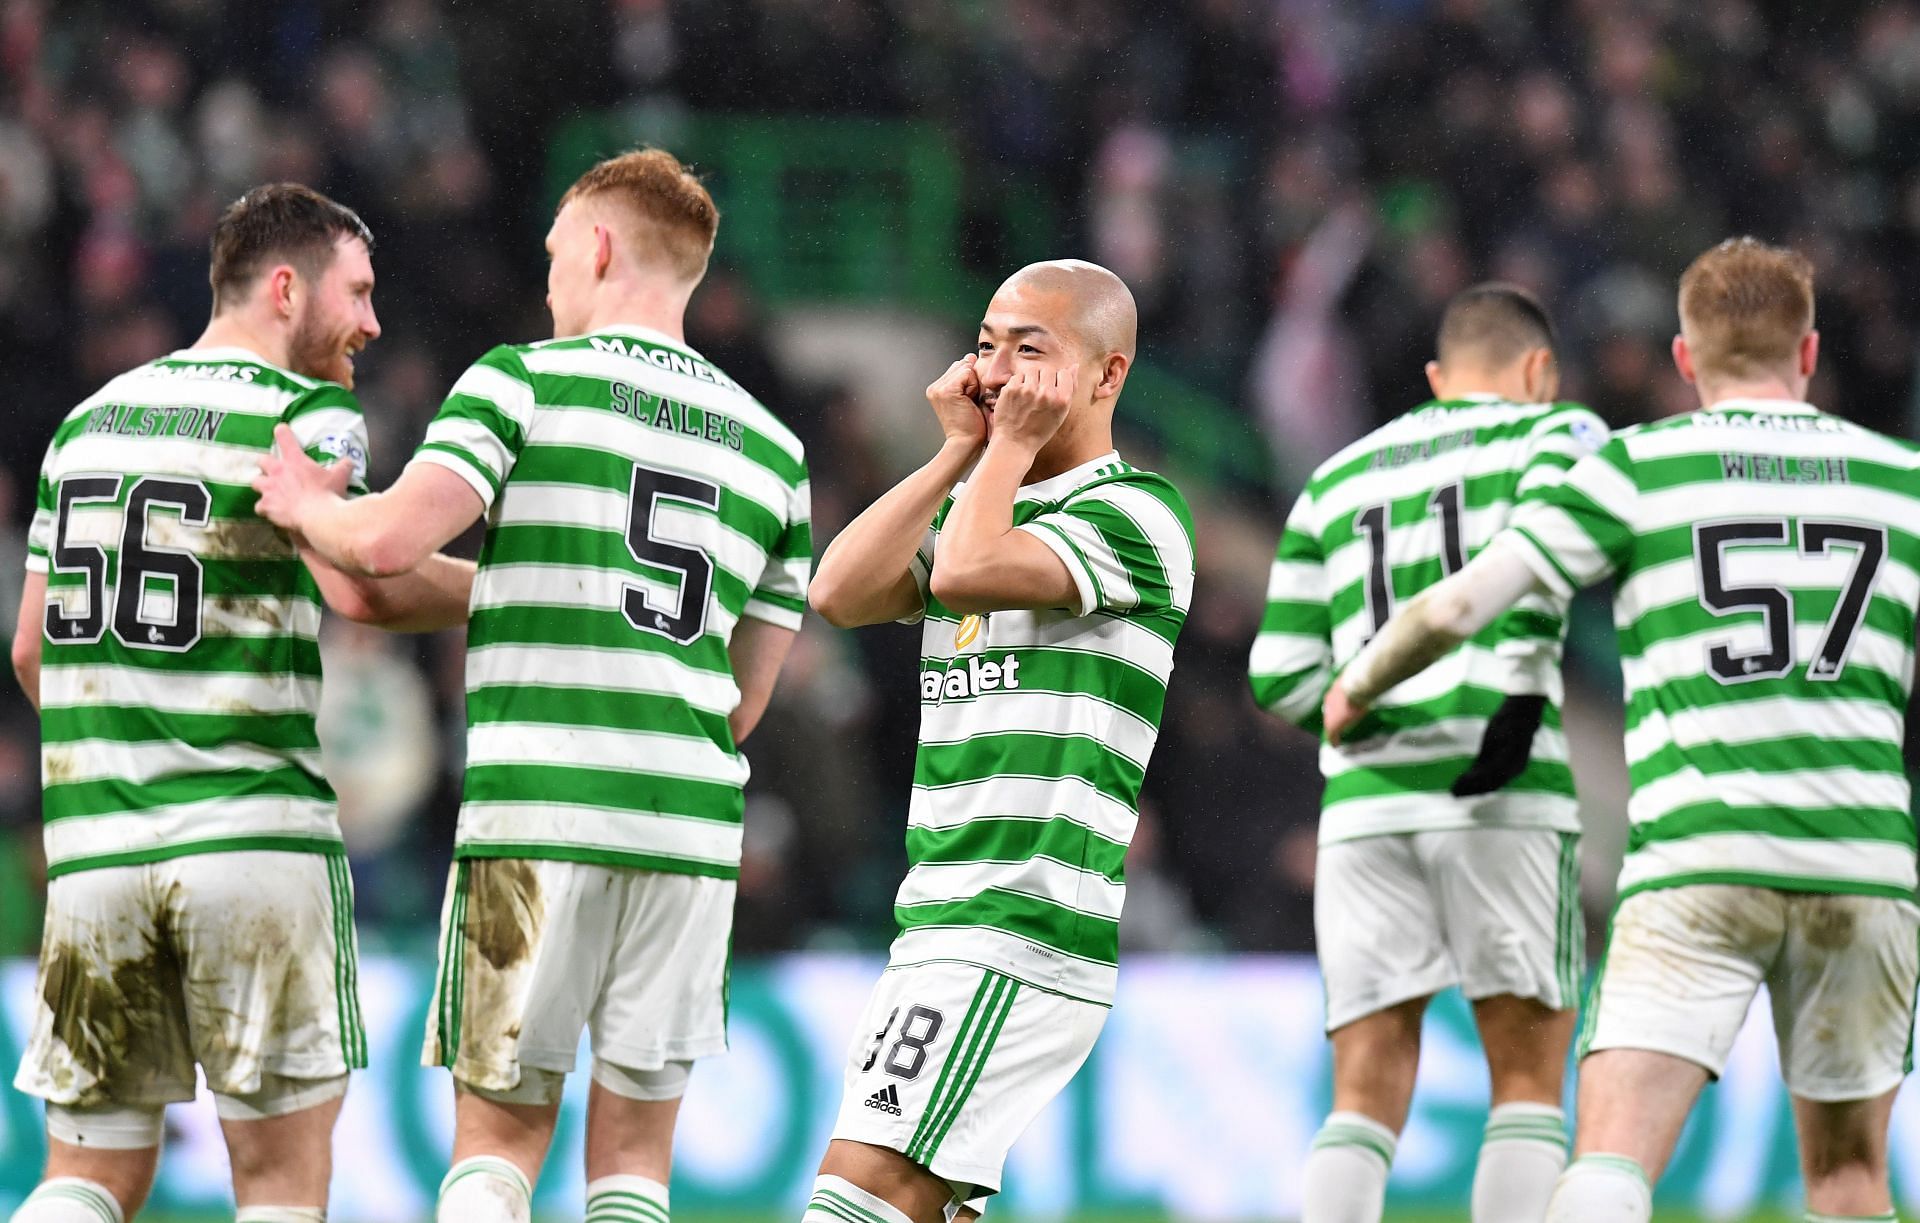 Celtic play Dundee on Sunday in the Scottish Premiership